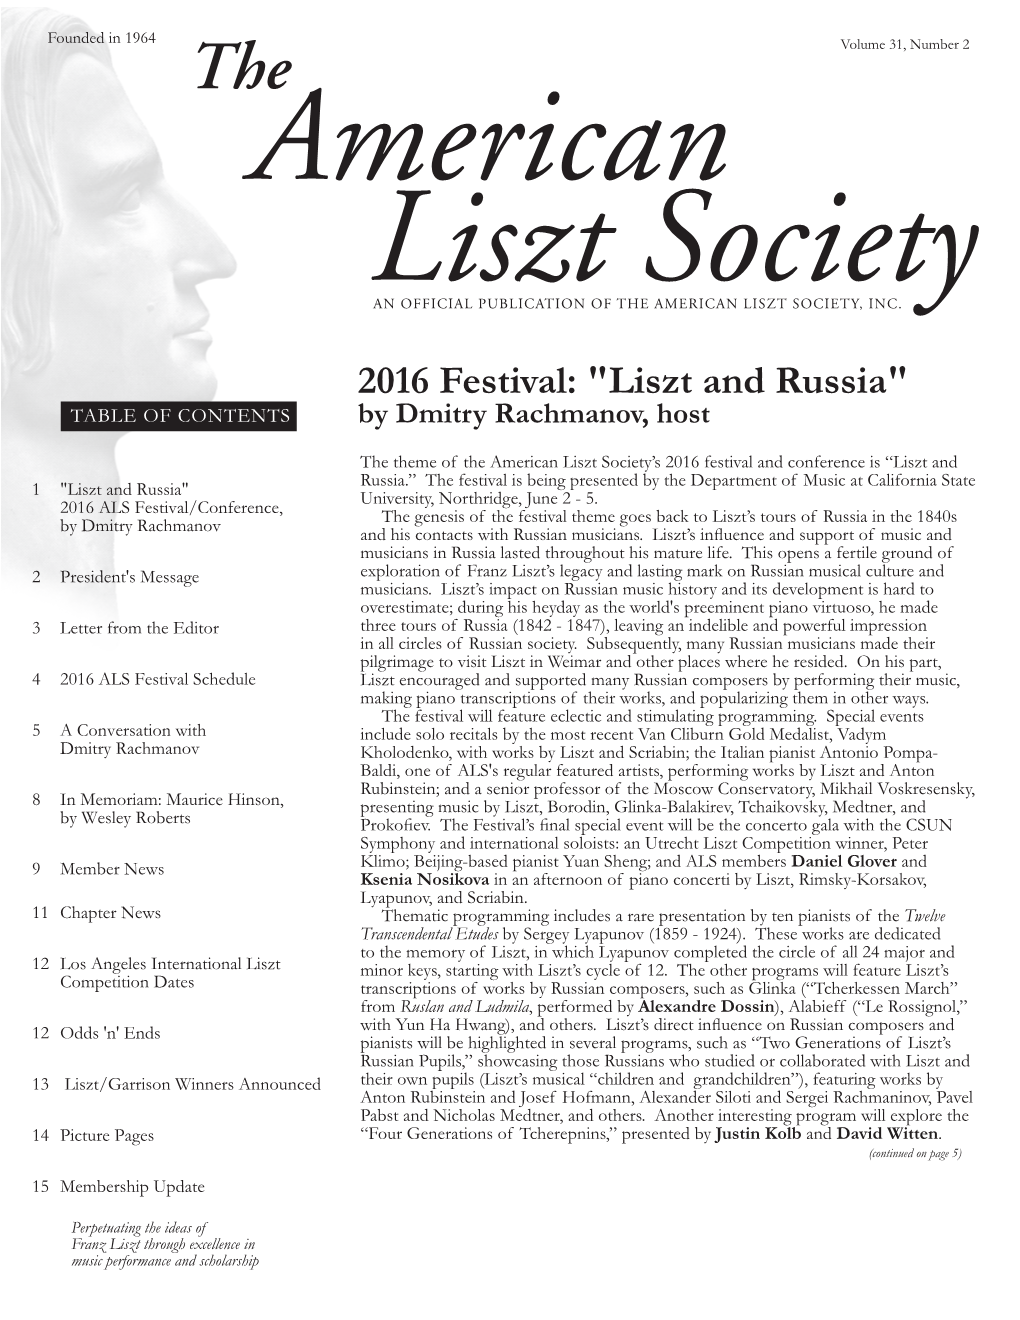 Liszt and Russia" TABLE of CONTENTS by Dmitry Rachmanov, Host